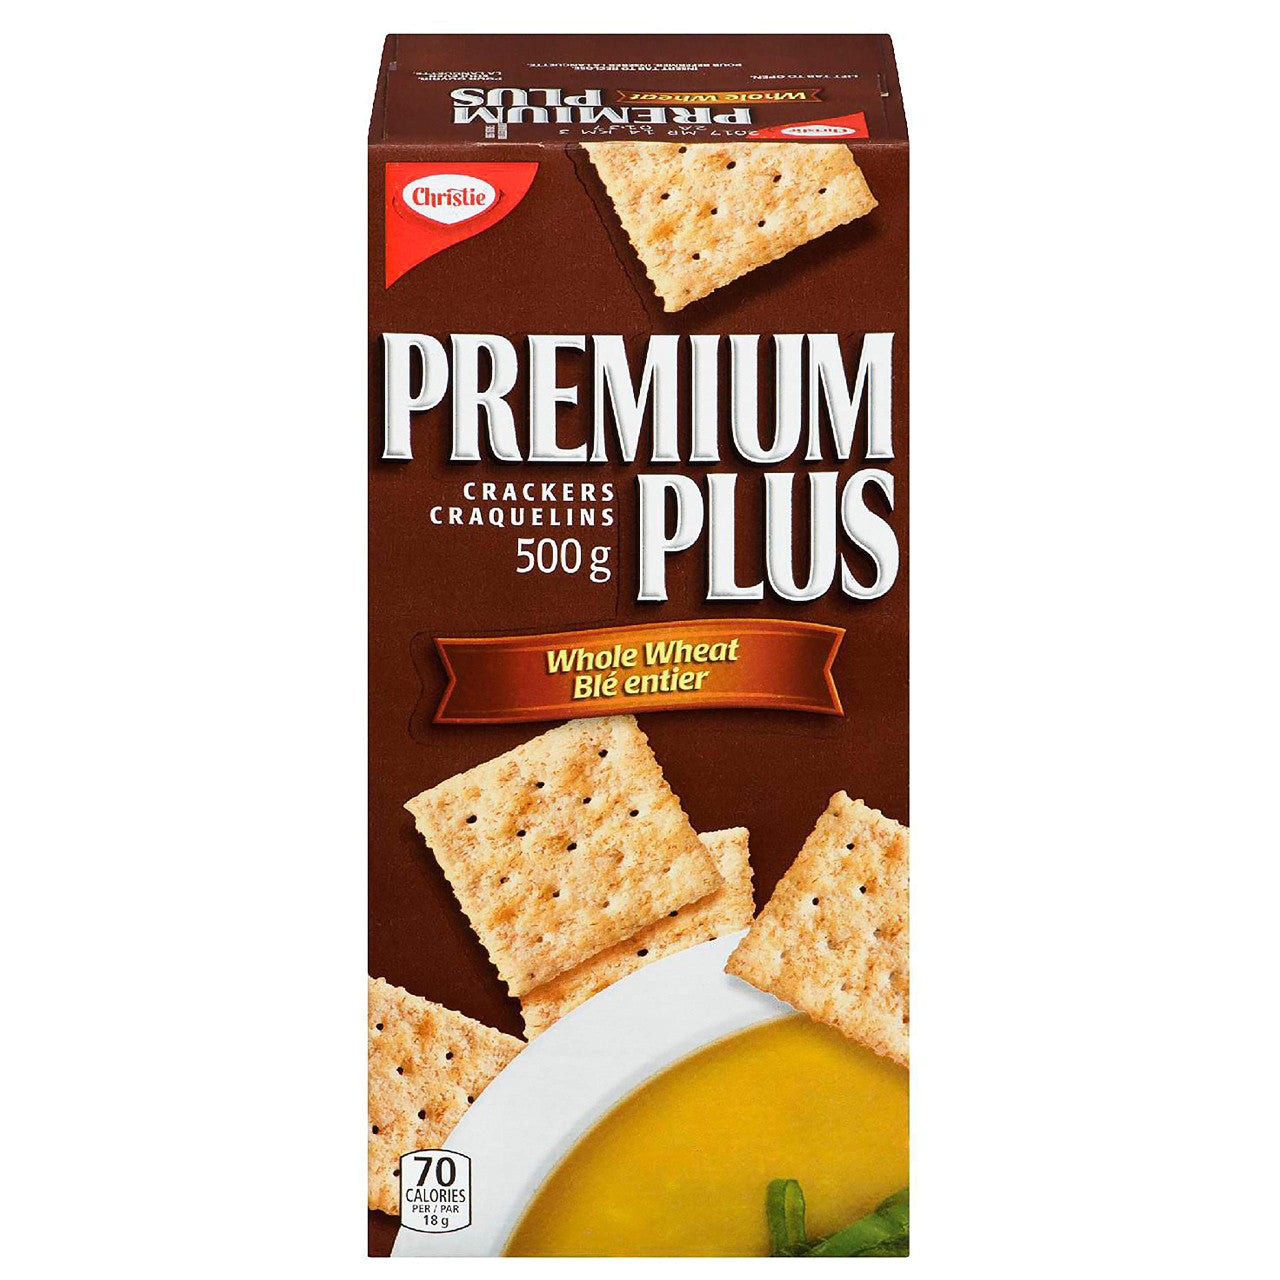 Christie Premium Plus Whole Wheat Crackers 500g/17.6oz (Imported from Canada)